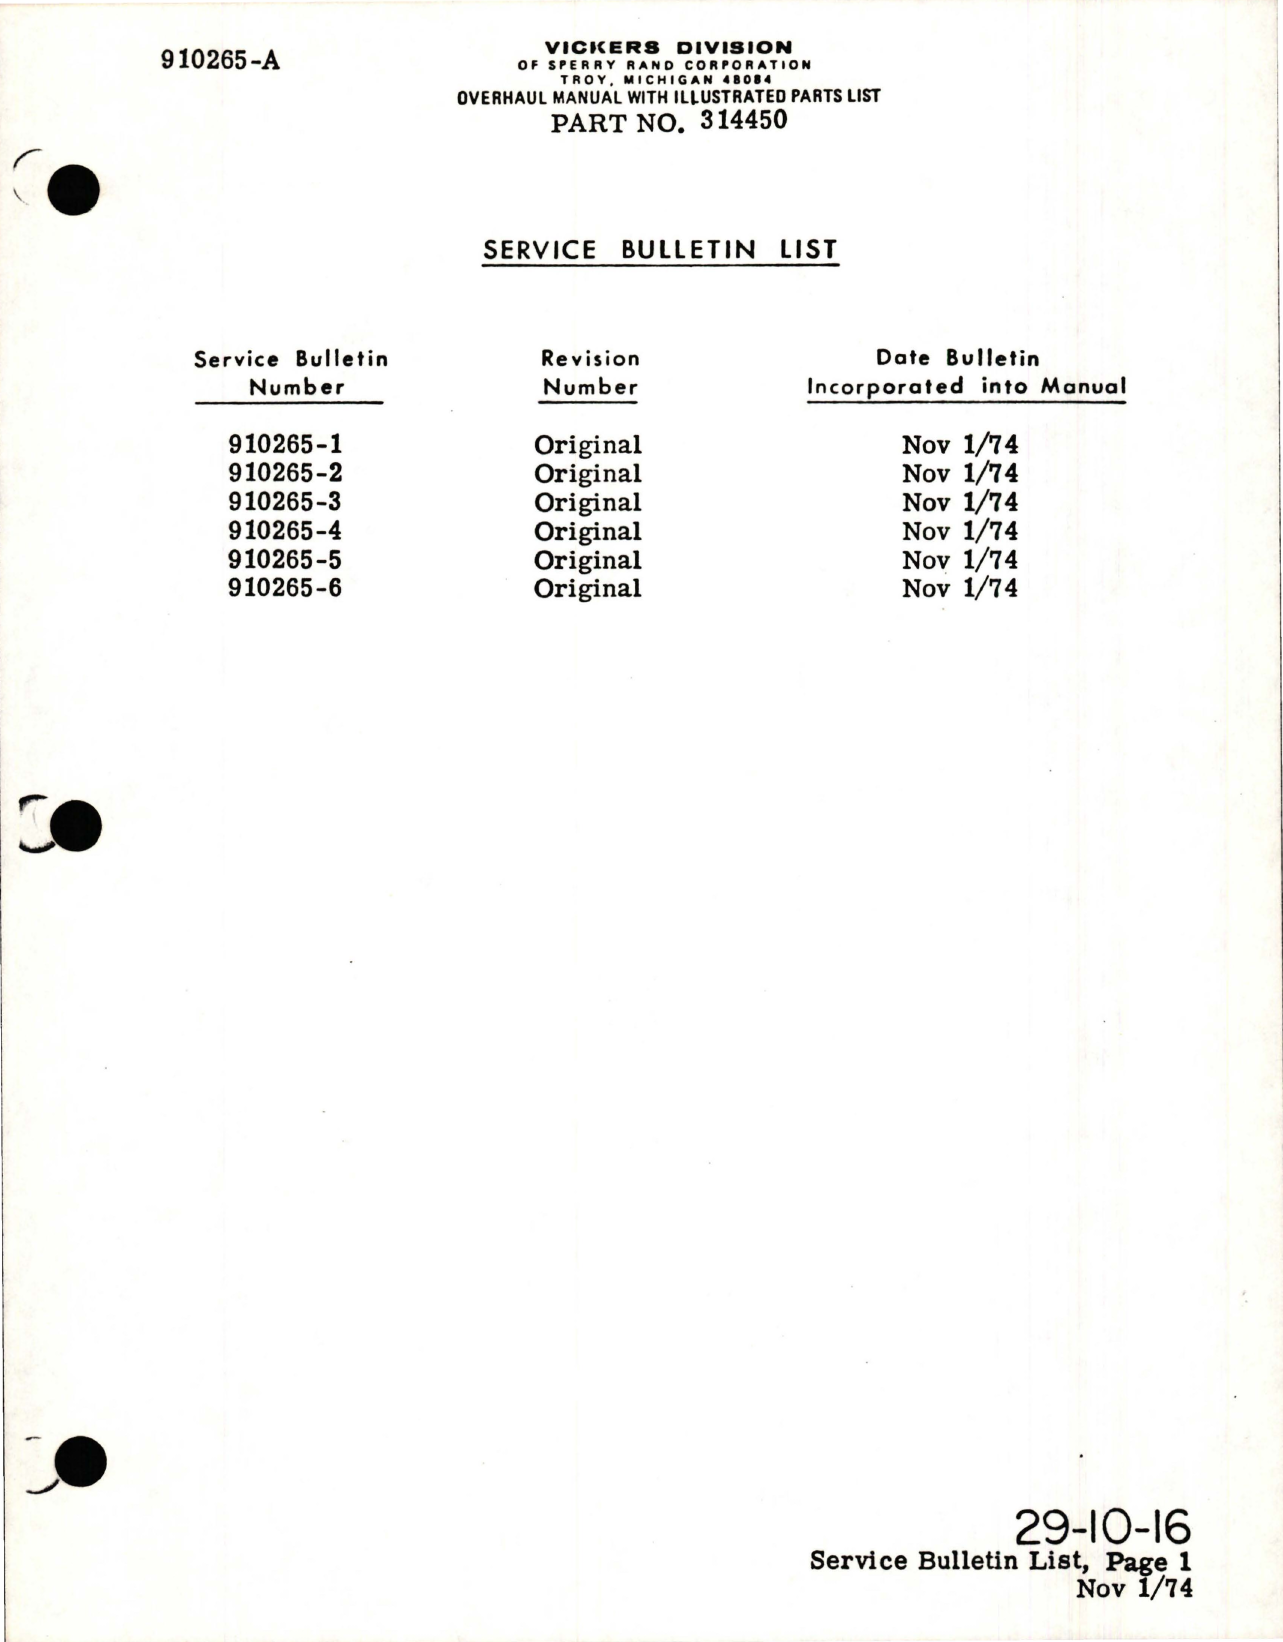 Sample page 9 from AirCorps Library document: Maintenance with Illustrated Parts List for Variable Displacement Hydraulic Pump Subassembly - Part 314450 - Model PVB-022-1